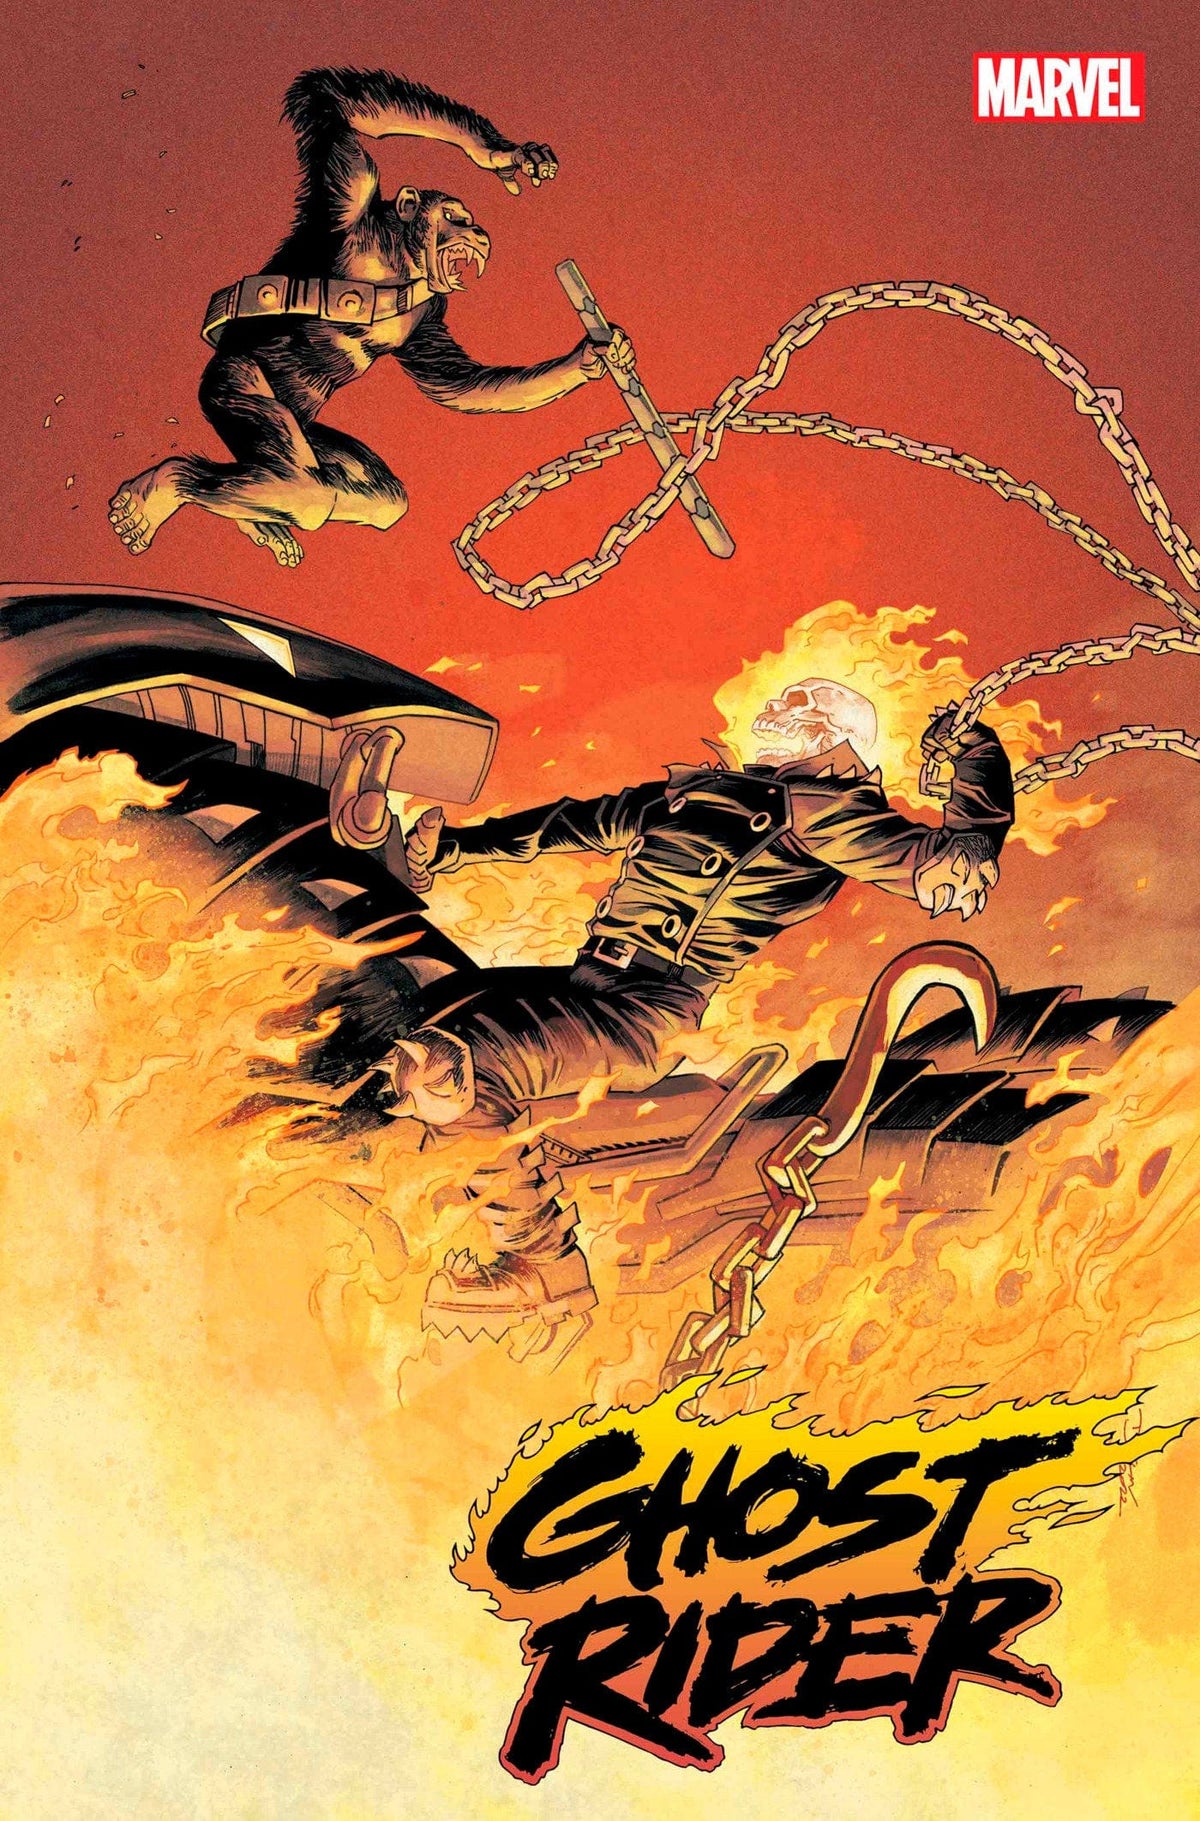 GHOST RIDER #11 SHALVEY PLANET OF THE APES VAR - Third Eye